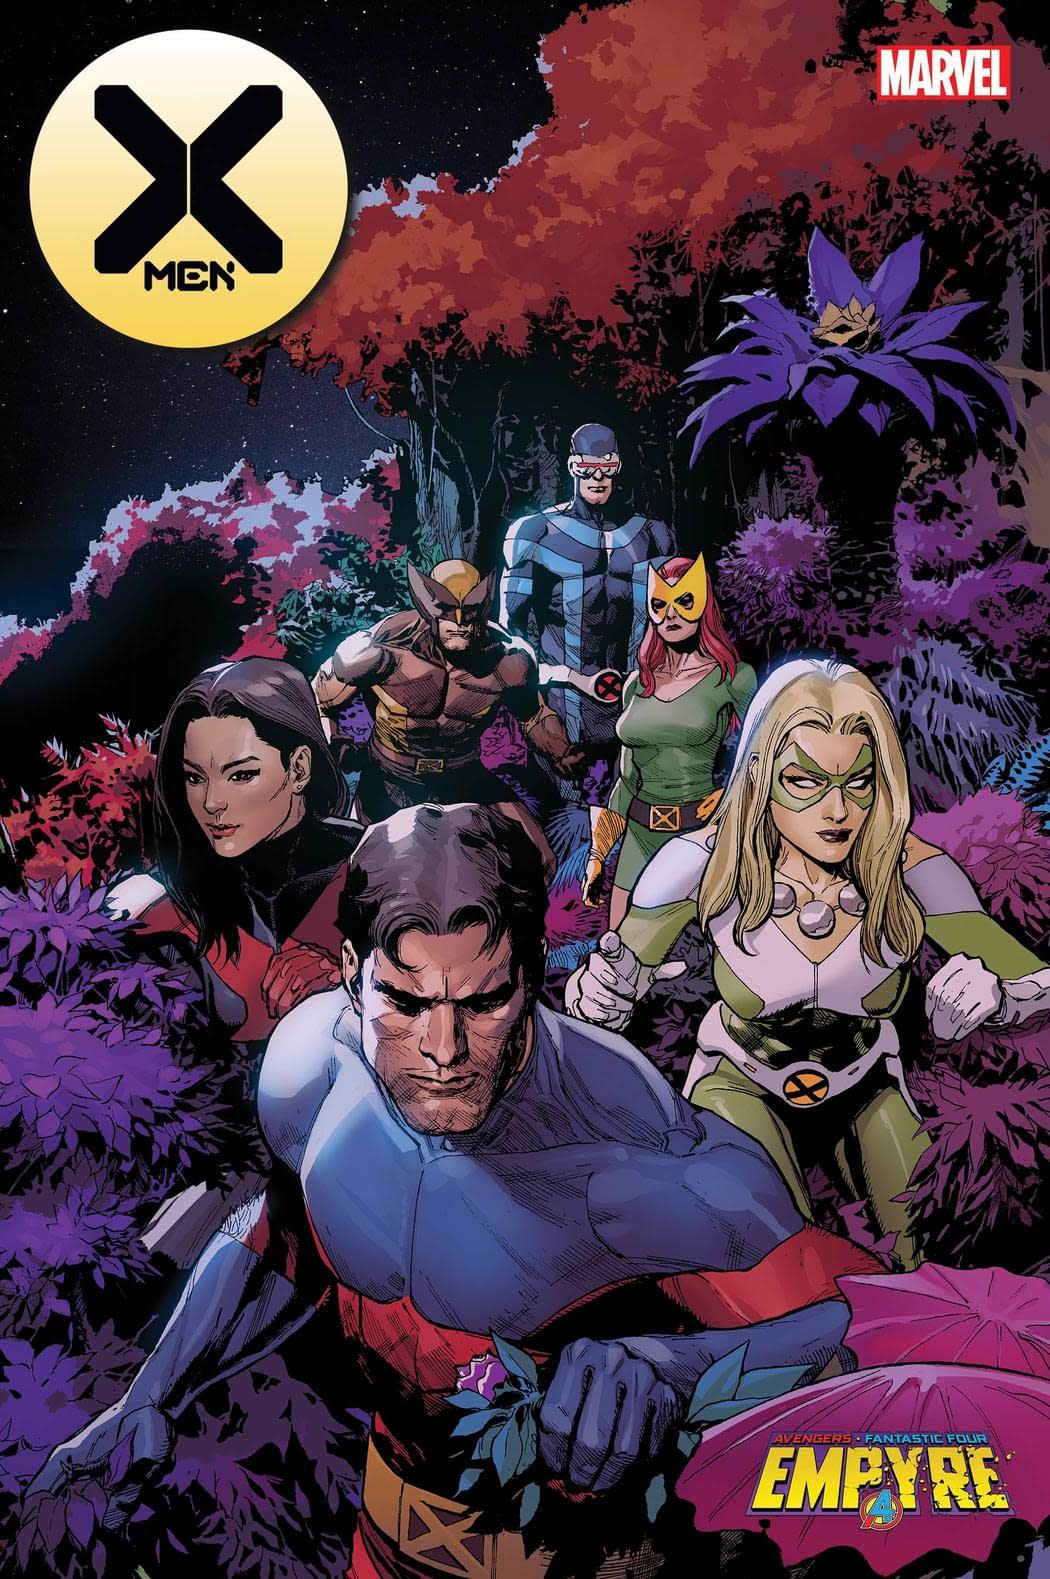 A4: Empyre with a Y Covers Reveal X-Men Tie-in, Wolverine and Spidey Rjoin Fantastic Four